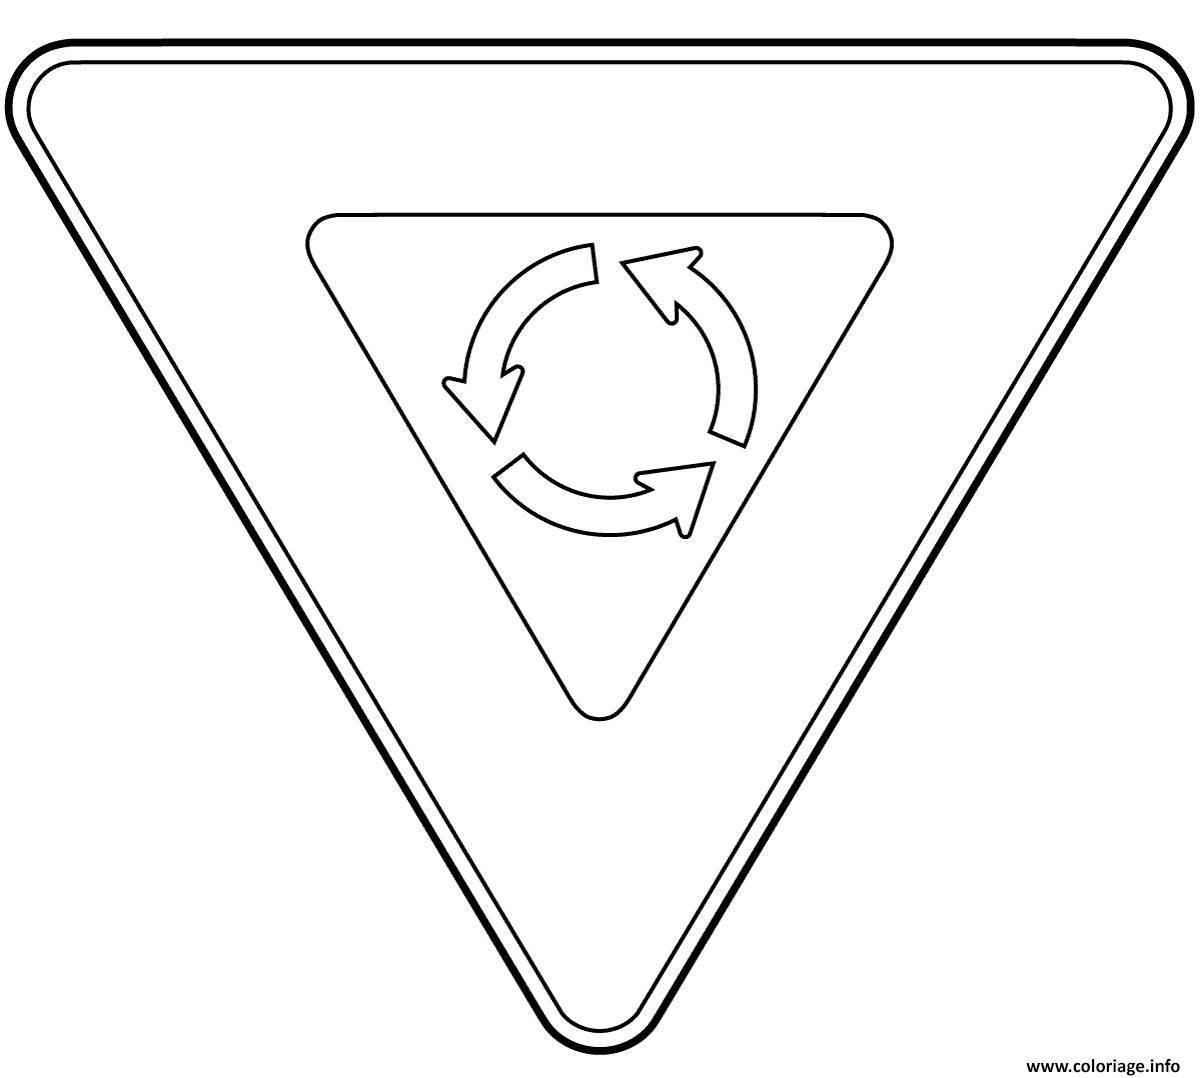 Coloring page attractive main road sign